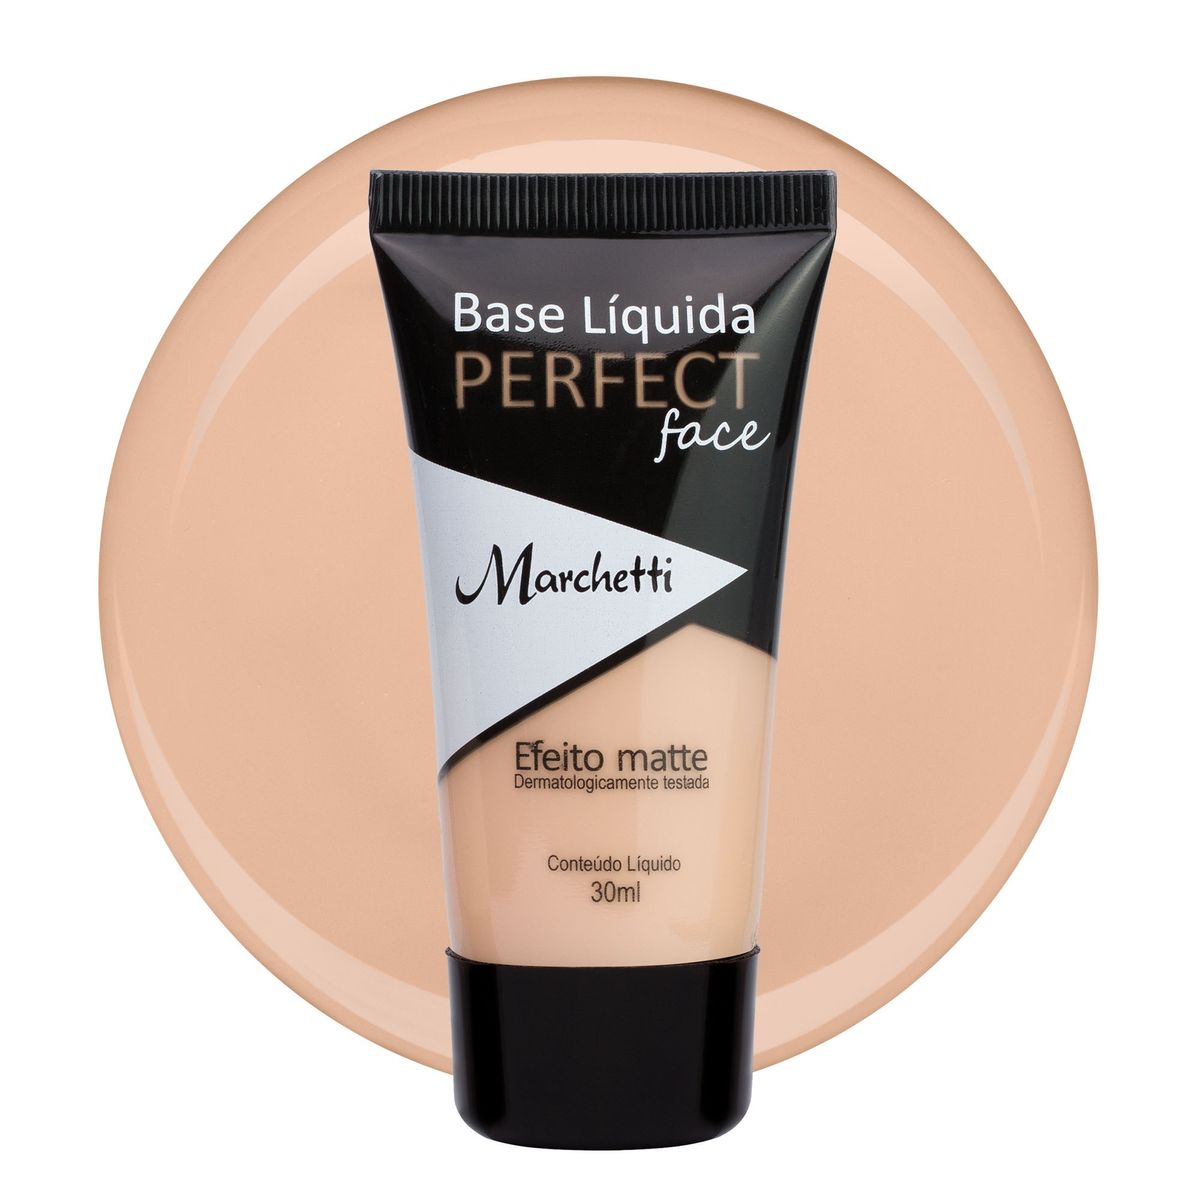 Base Líquida Marchetti Perfect Face 3 Bege 30ml image number 0